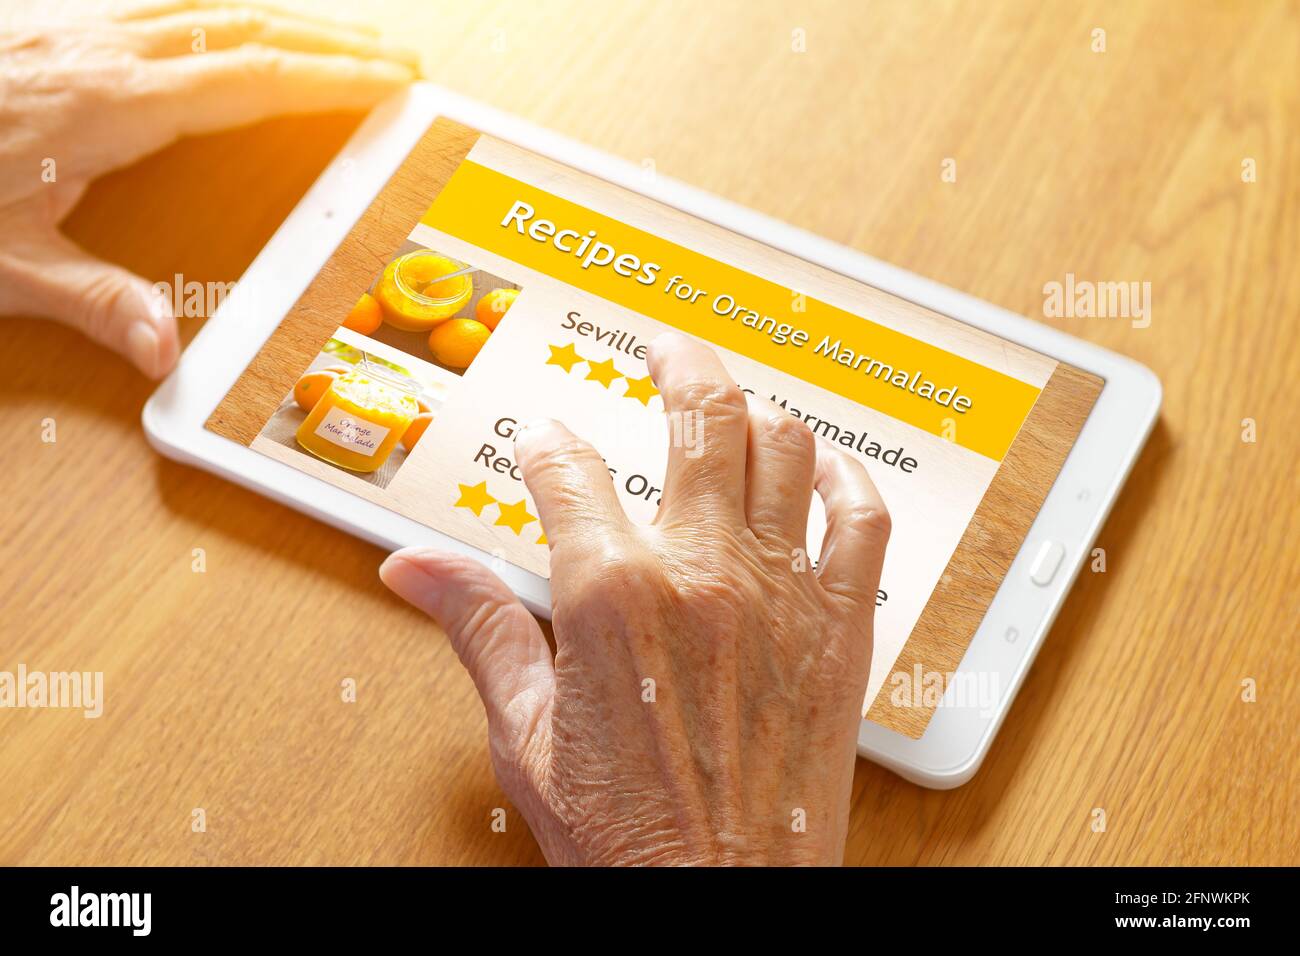 Hands of a senior woman touching a tablet screen to view a recipe for orange marmalade, wooden table background. Stock Photo